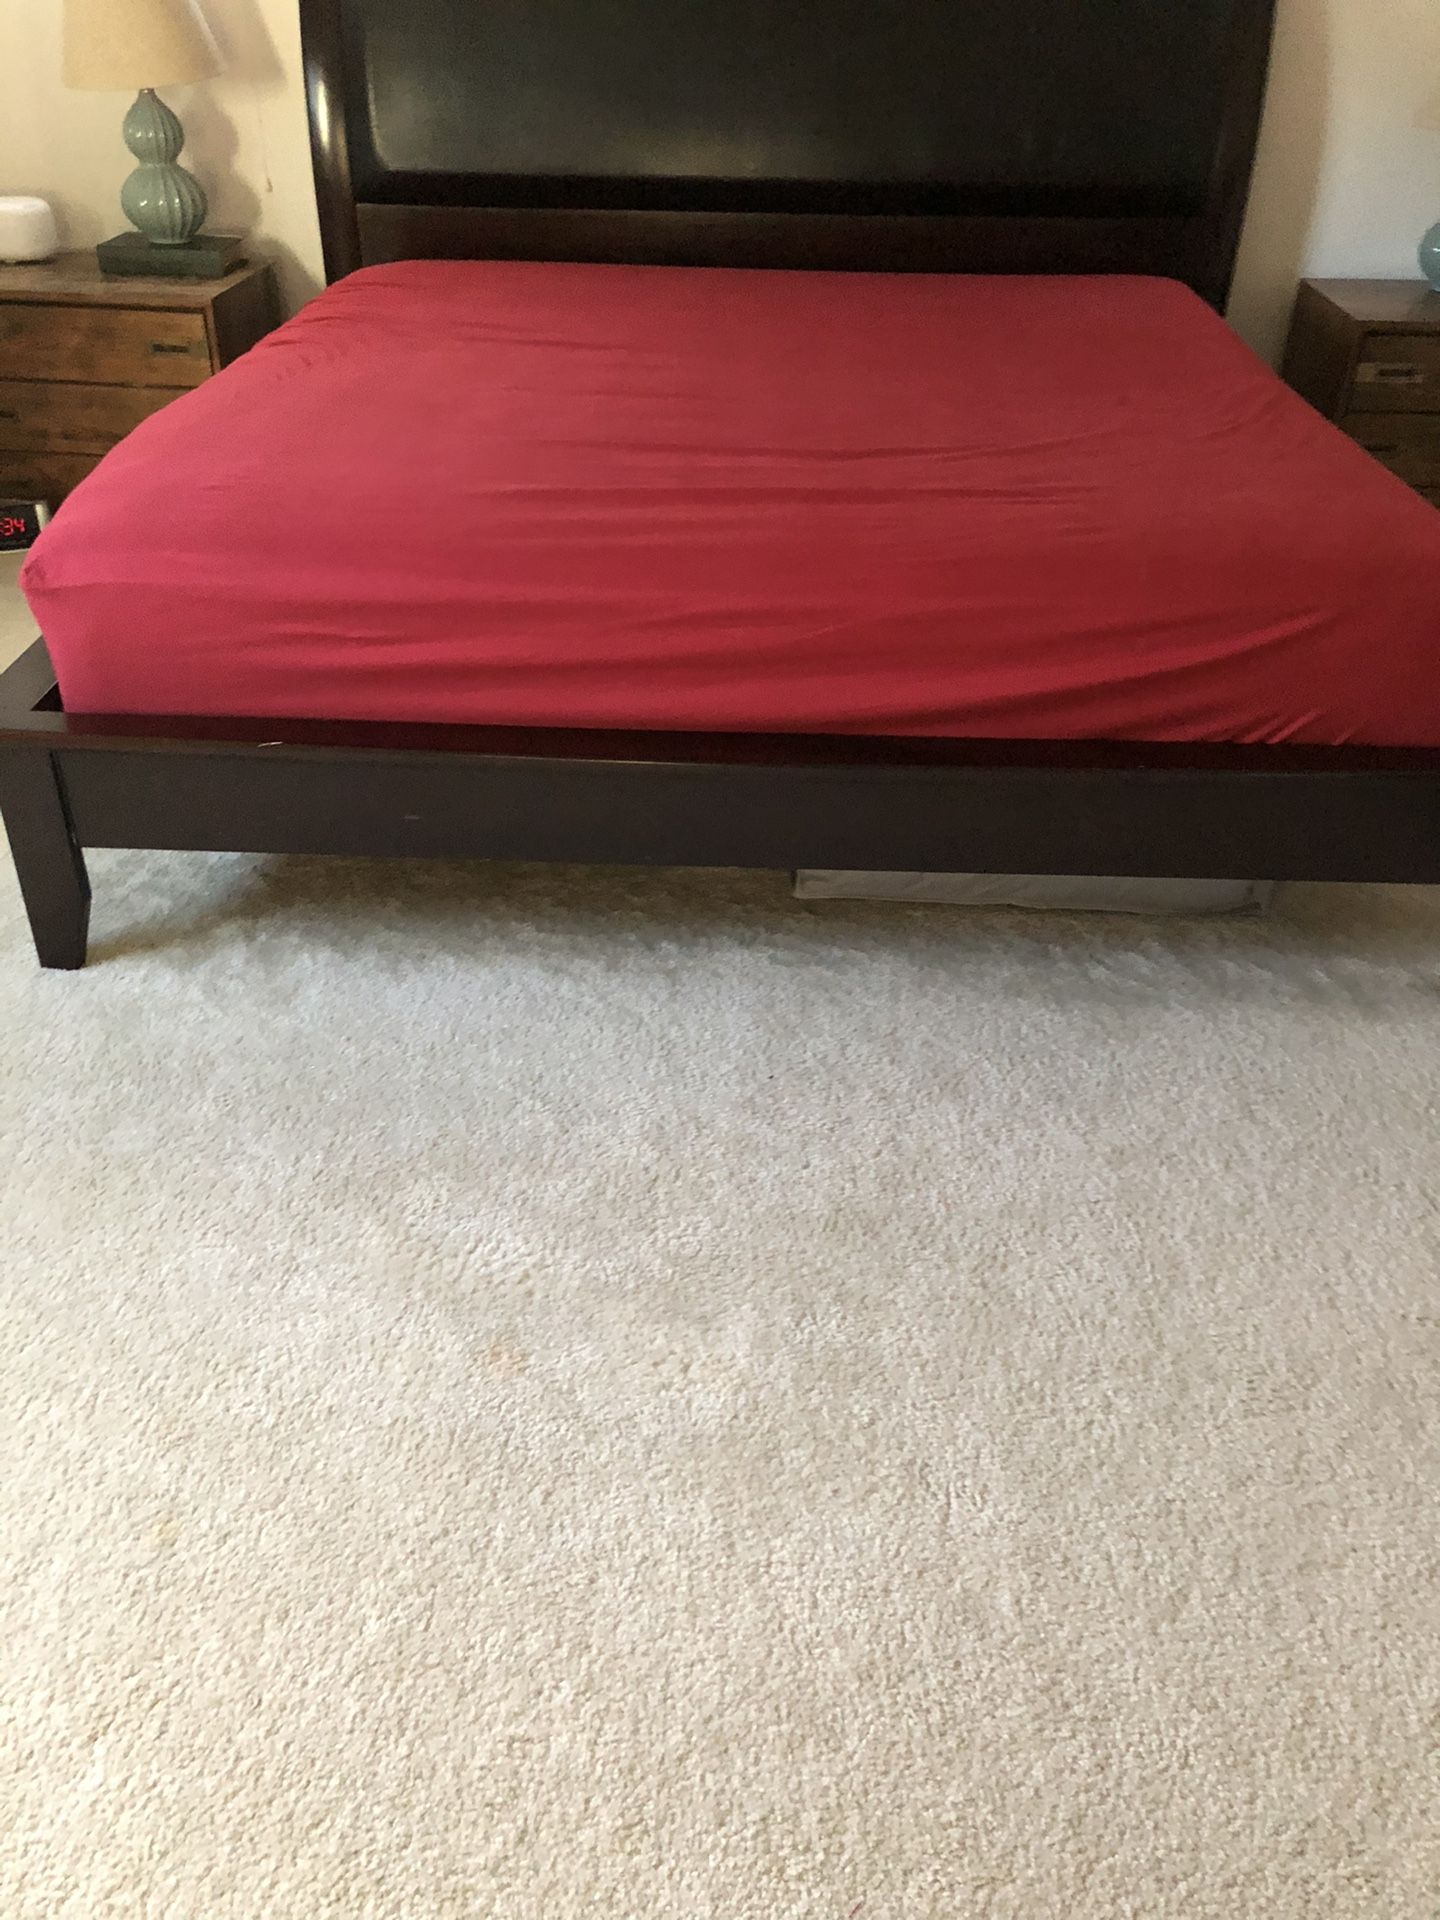 King wooden/ faux leather bed frame and headboard